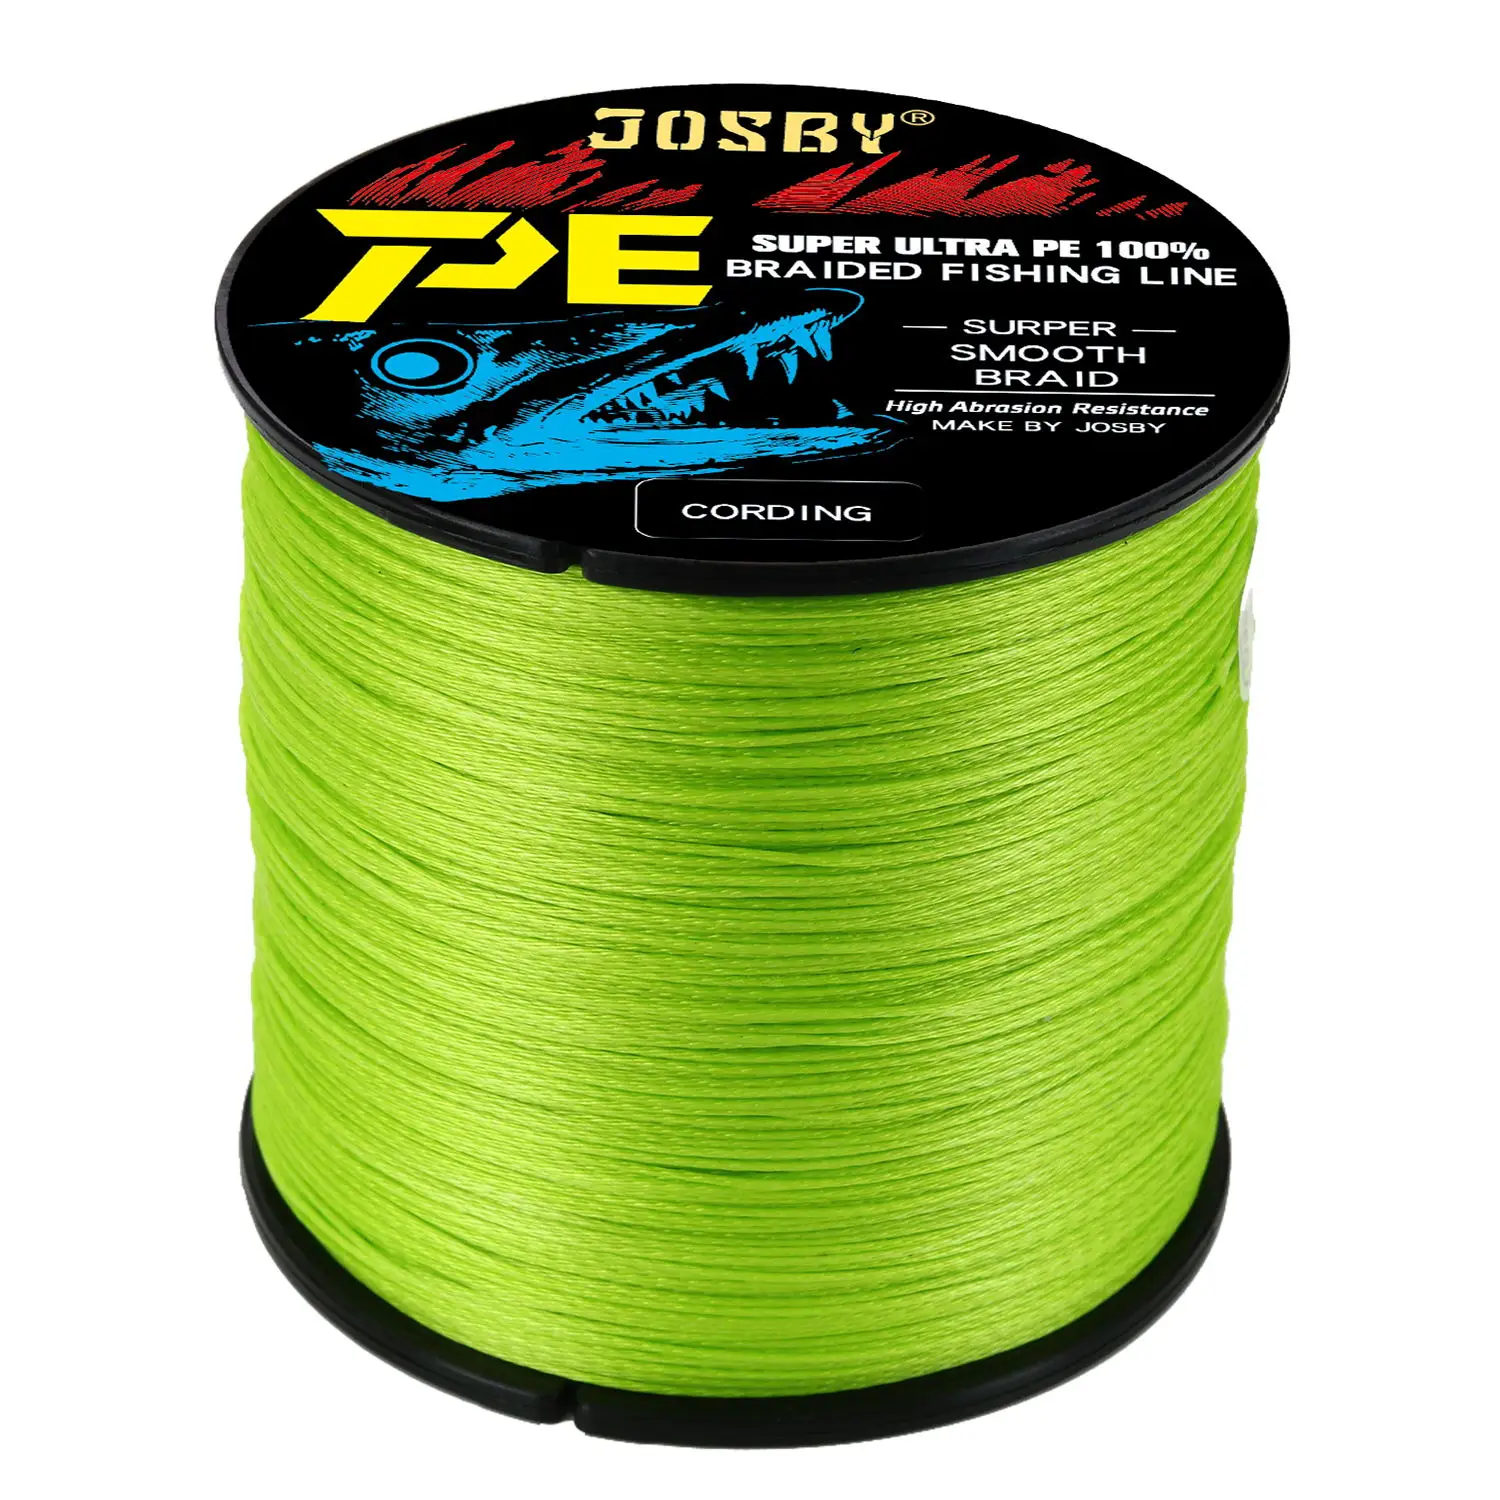 JOSBY Saltwater Braided Fishing Line 9 Strand Japan Super Strong